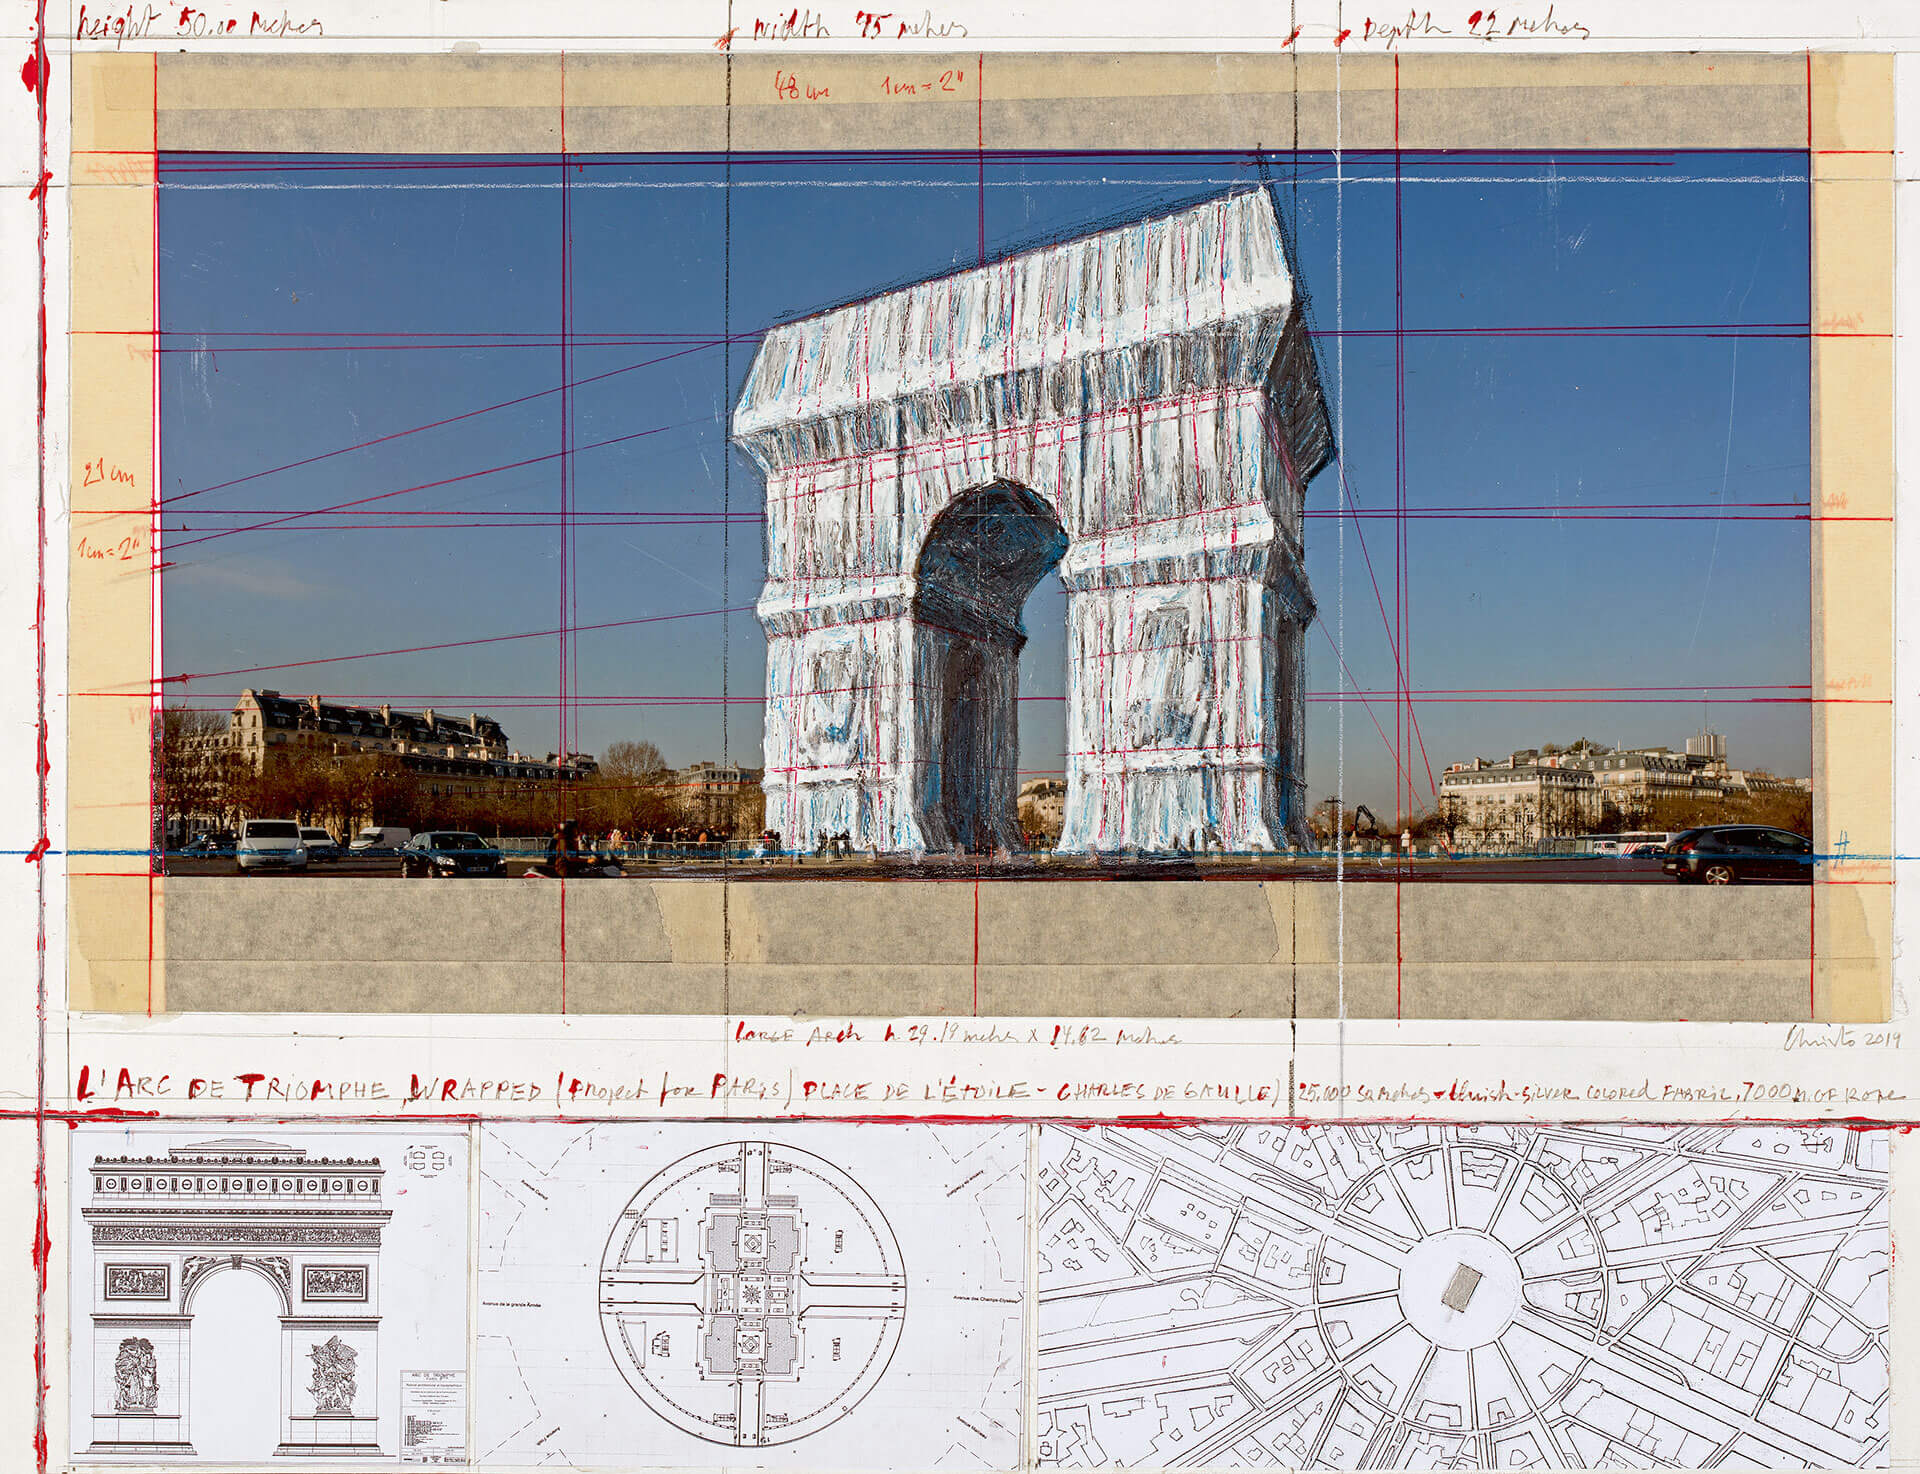 The collage L’Arc de Triomphe, Wrapped (Project for Paris) Place de l’Étoile—Charles de Gaulle from the Würth Collection, Inv. 18.389, offers a unique view of this ultimate project by Christo, who passed away in May 2020. His team will be responsible for the project involved in wrapping Paris’s Arc de Triomphe in fabric in 2021.